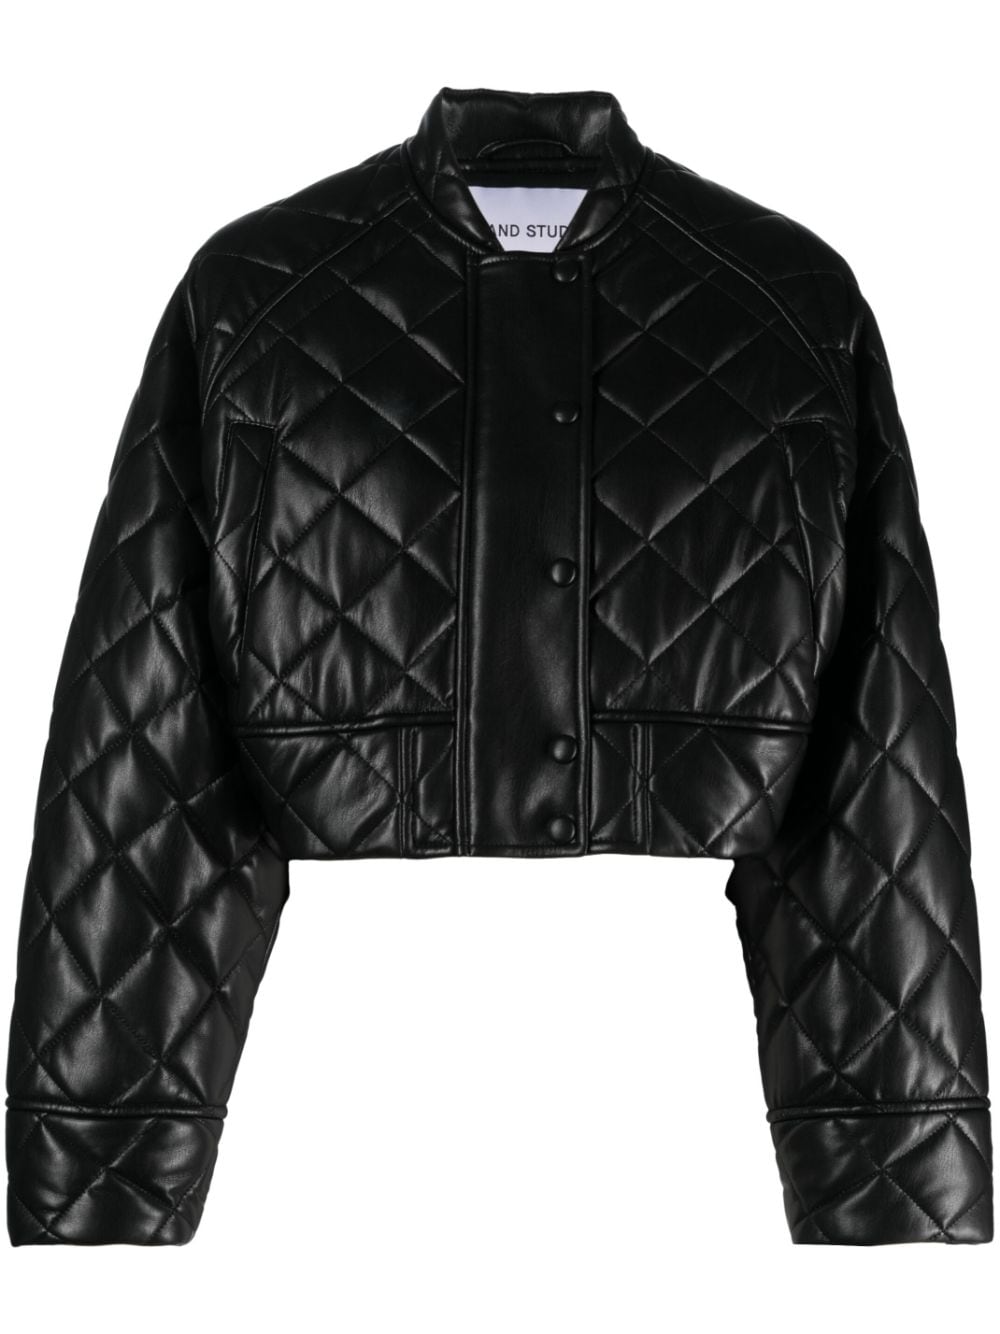 STAND STUDIO AVA QUILTED CROPPED JACKET